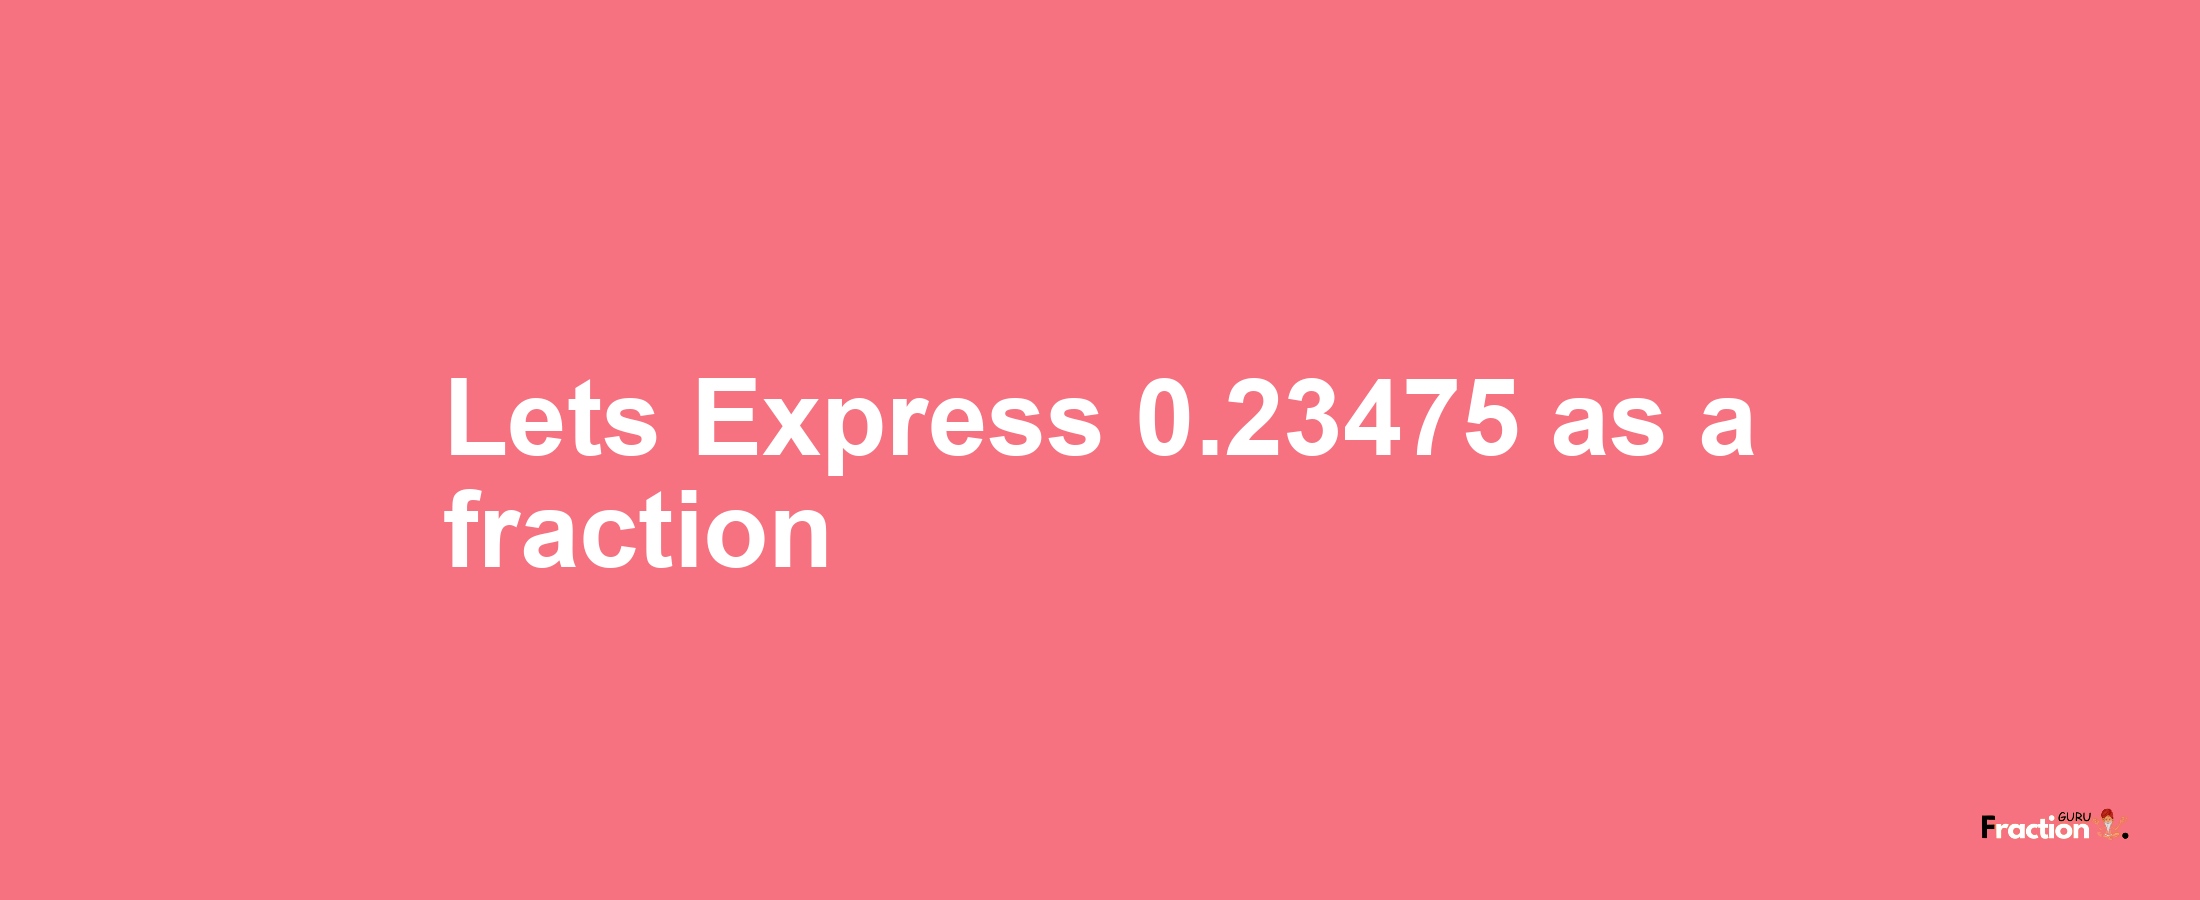 Lets Express 0.23475 as afraction